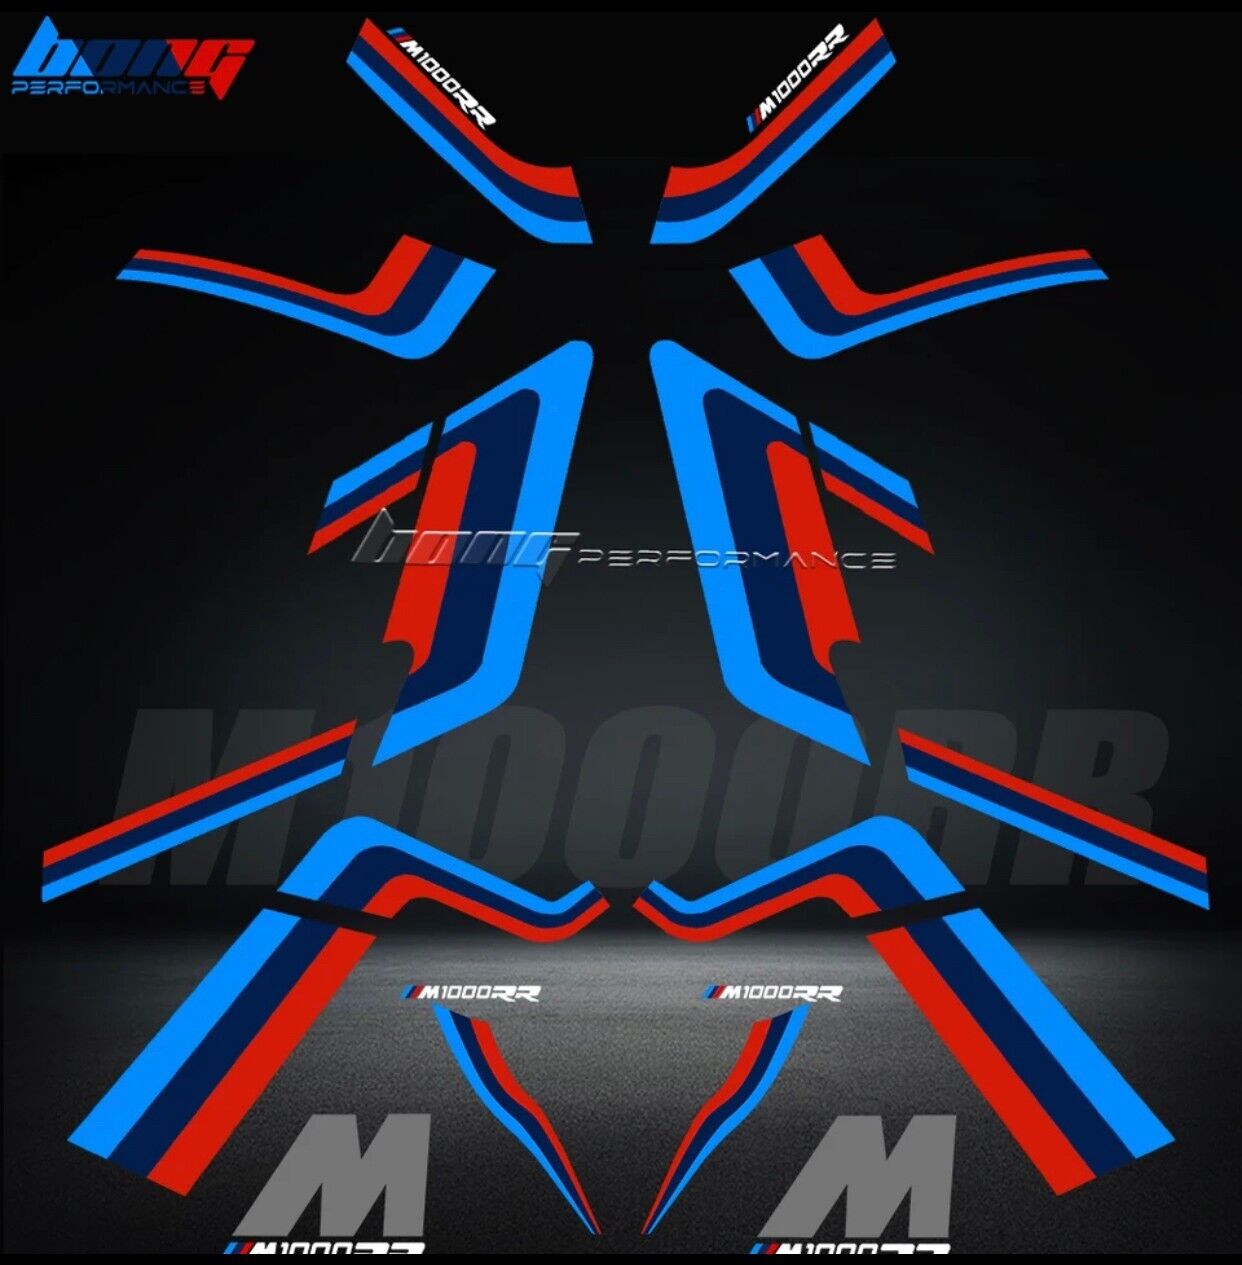 FOR BMW S1000RR M1000RR motorcycle fairing Decals Vehicle Sticker Set 2021-2022